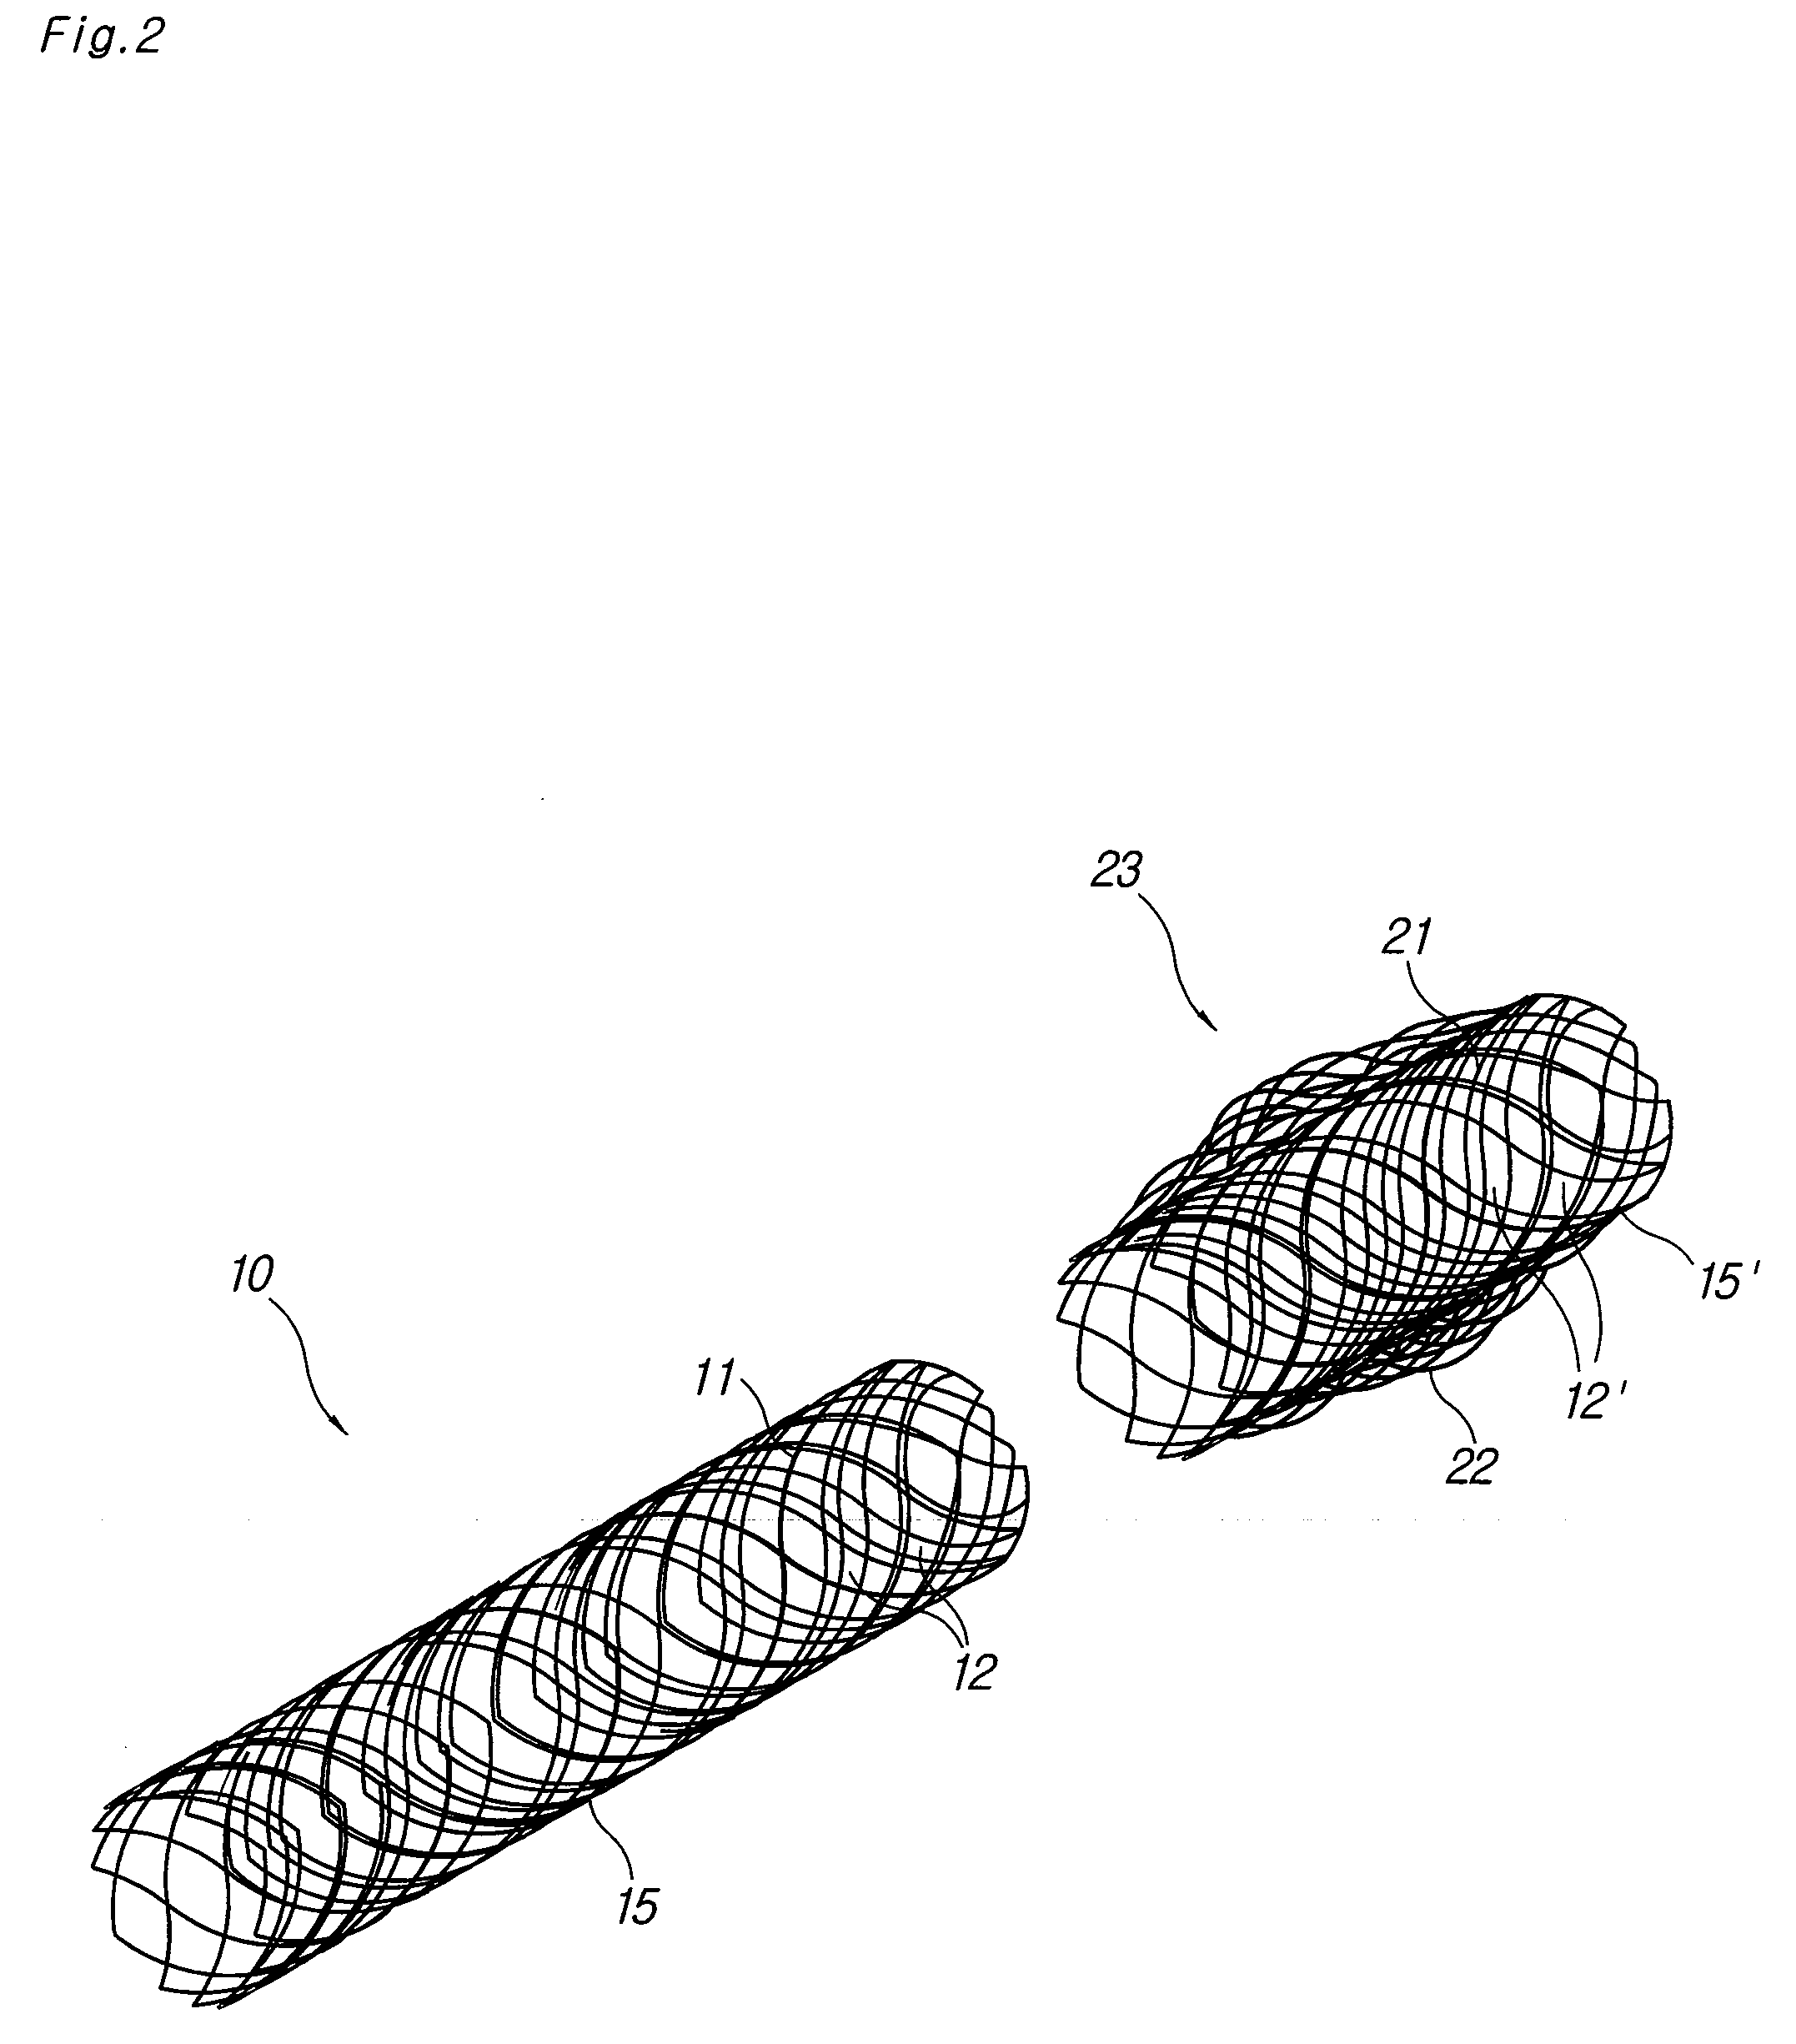 Biodegradable double stent